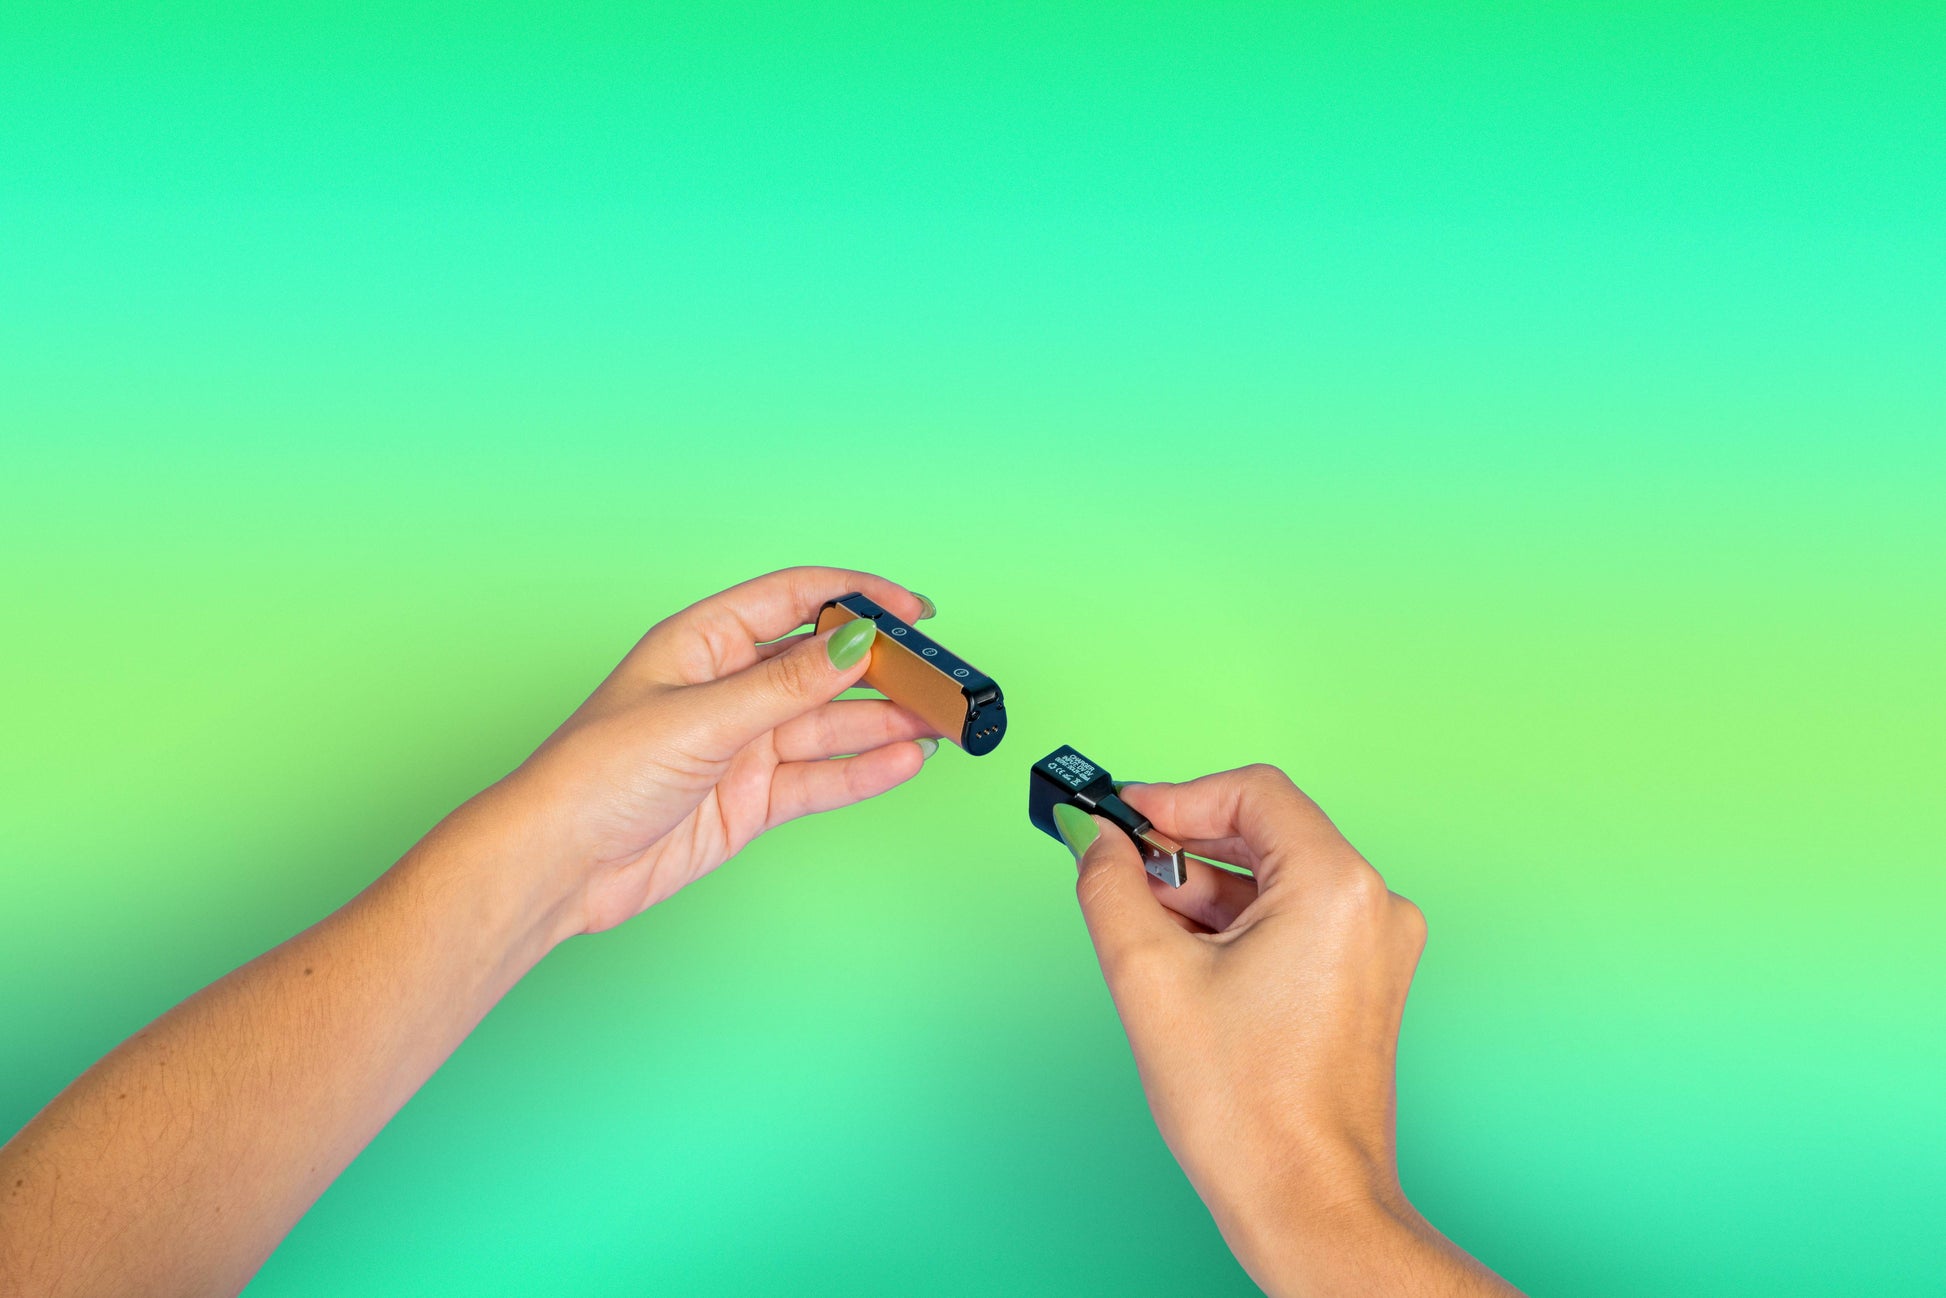 A girl with green nails attaches the magnetic charger to the base of an Ooze Novex